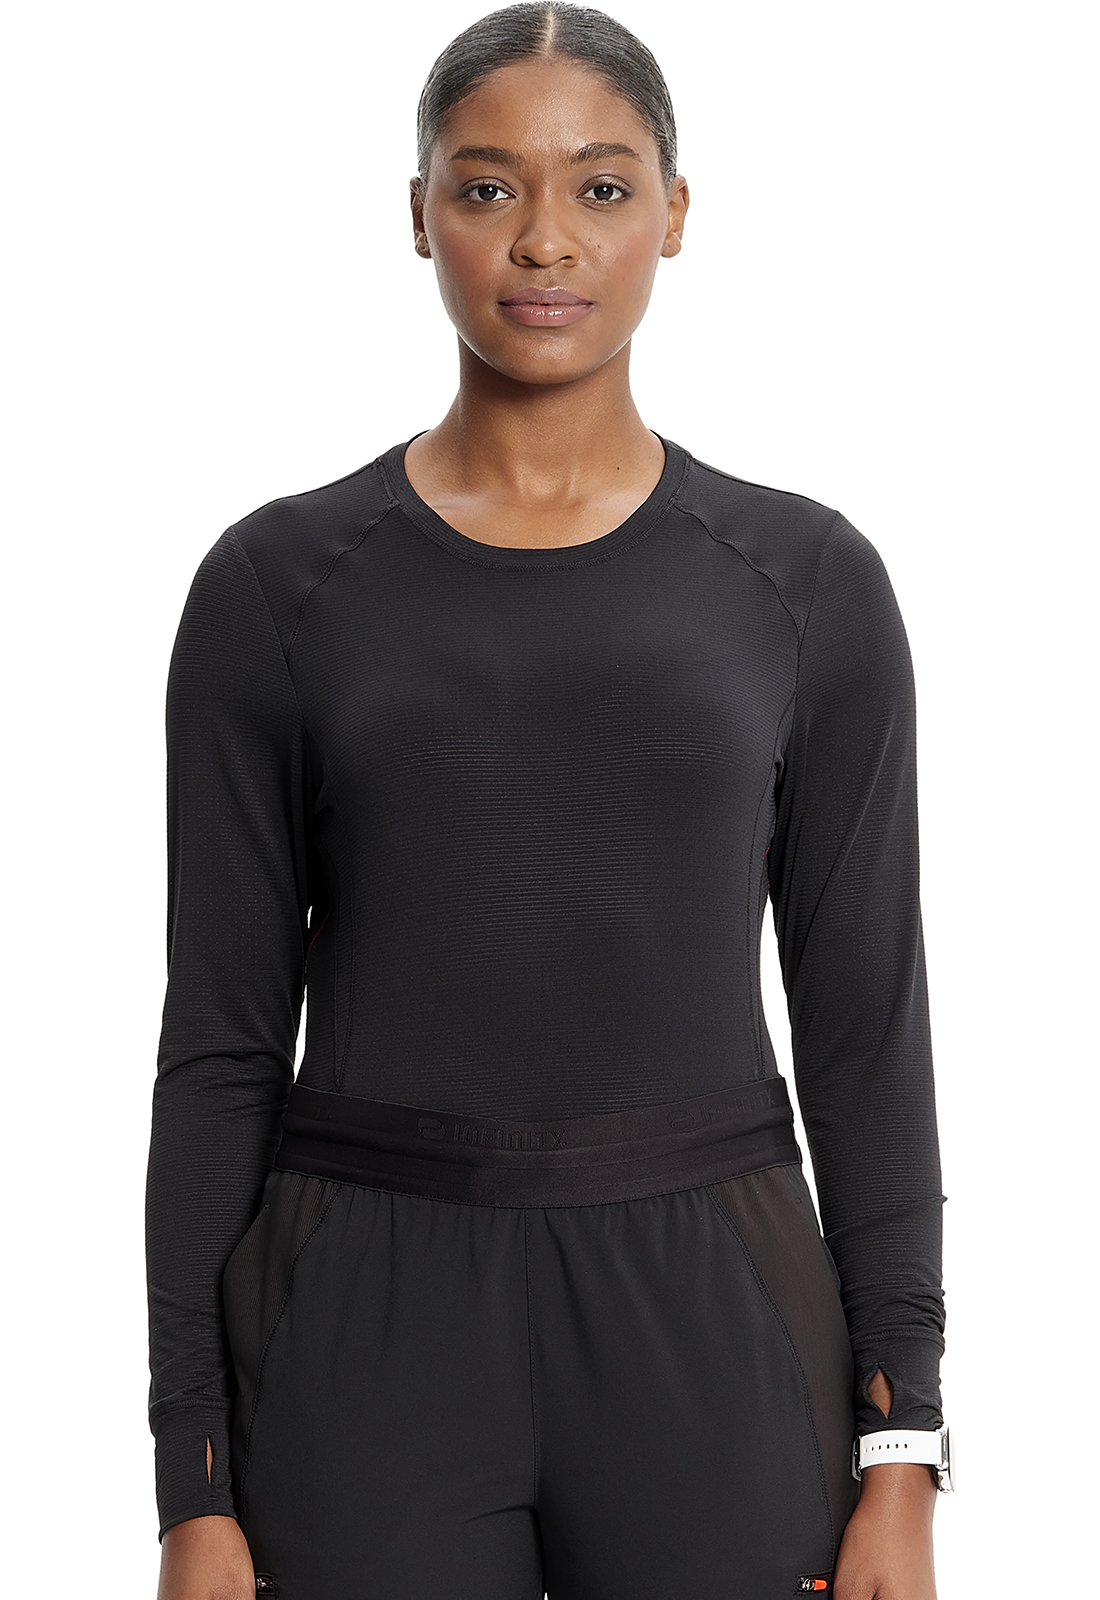 Buy Infinity INFINITY ESSENTIALS Long Sleeve Performance Underscrub -  Infinity Online at Best price - NY